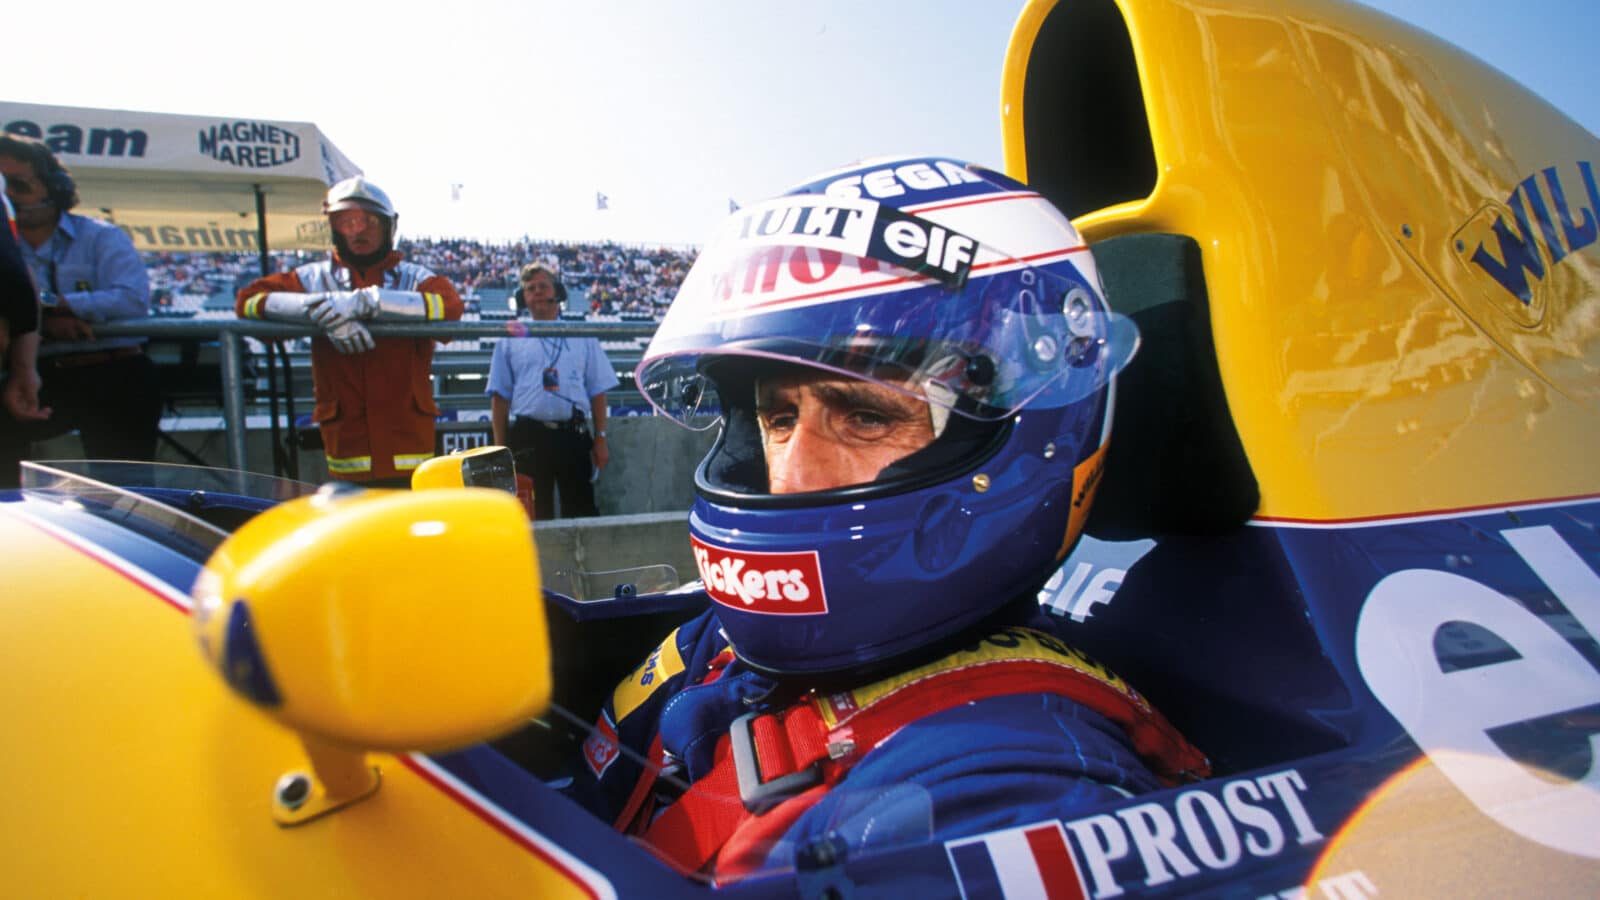 Prost at Magny-Cours in 1993